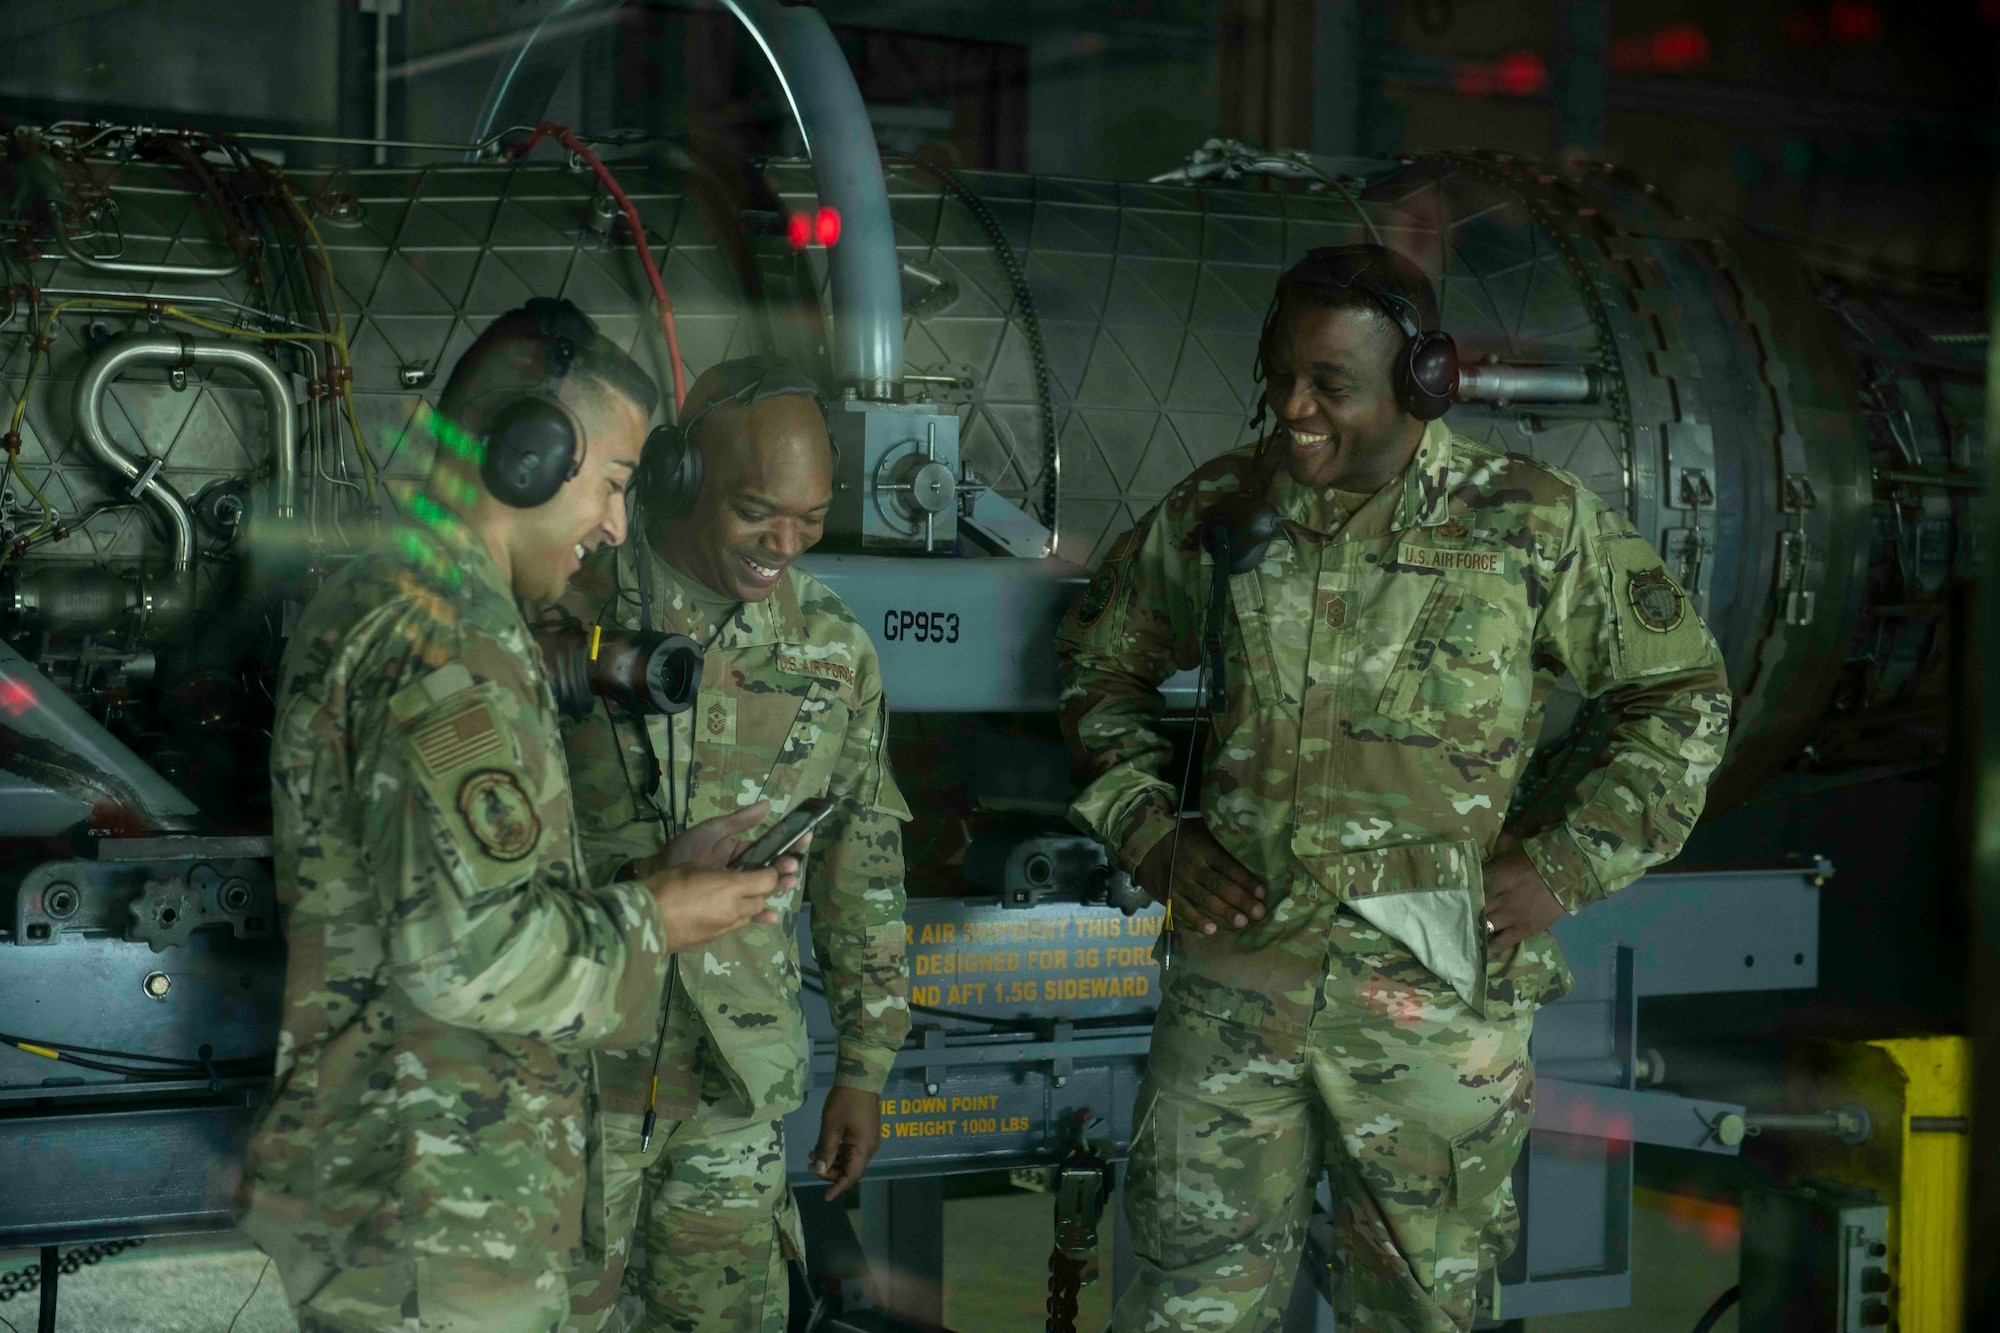 U.S. Air Force Chief Master Sgt. Carlos Damian, left, 18th Maintenance Group Superintendent, Chief Master Sgt. Ronnie Woods, middle, 18th Wing Command Chief, and Chief Master Sgt. Wendell J. Snider, right, U.S. Forces Japan Senior Enlisted Leader, prepare to exit the engine test cell